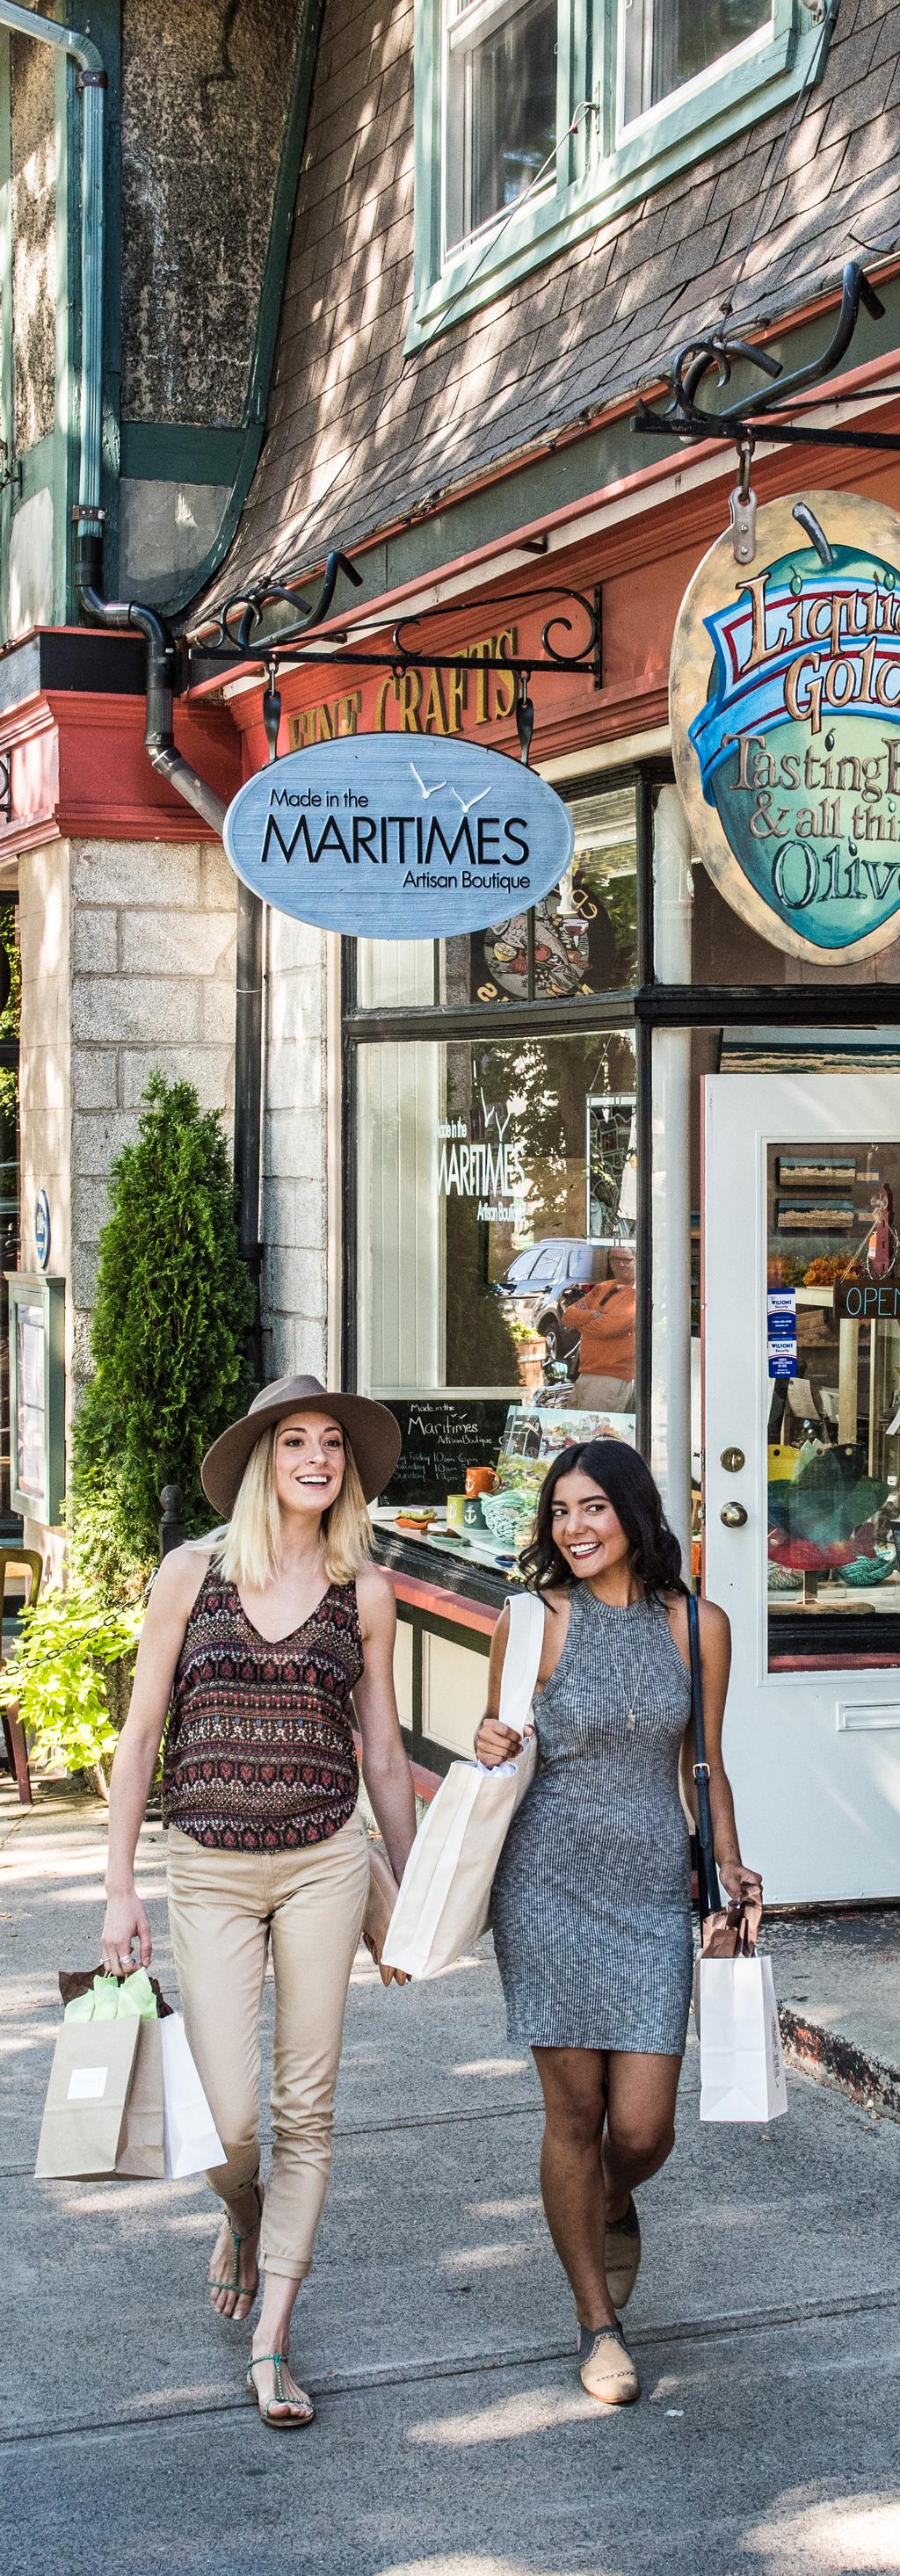 Halifax is the shopping capital of the Maritimes! Halifax has the most shopping options east of Montreal. Halifax has something for everyone, from large shopping centres to boutique shops.